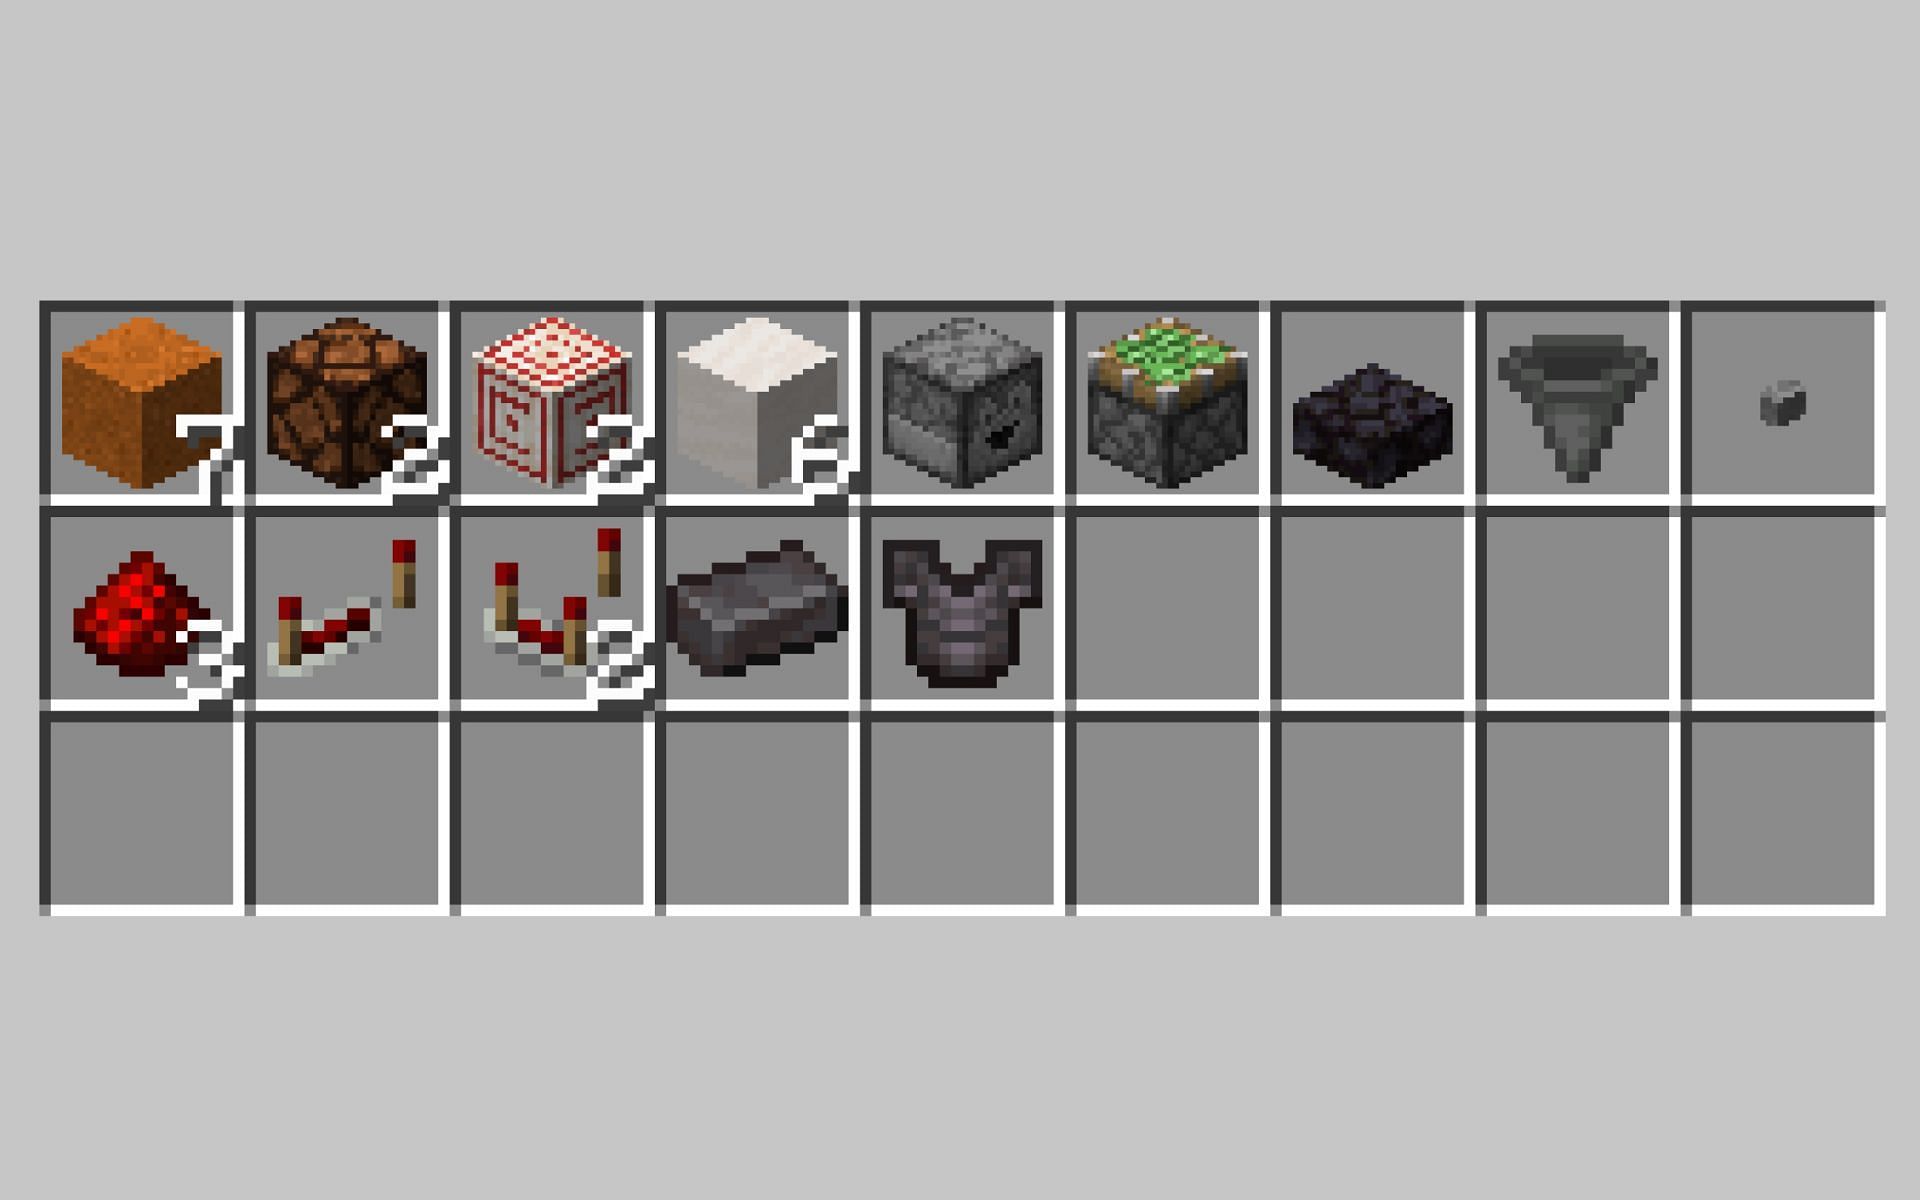 Players will need several items, redstone components, and blocks to complete this build. (Image via Minecraft.)